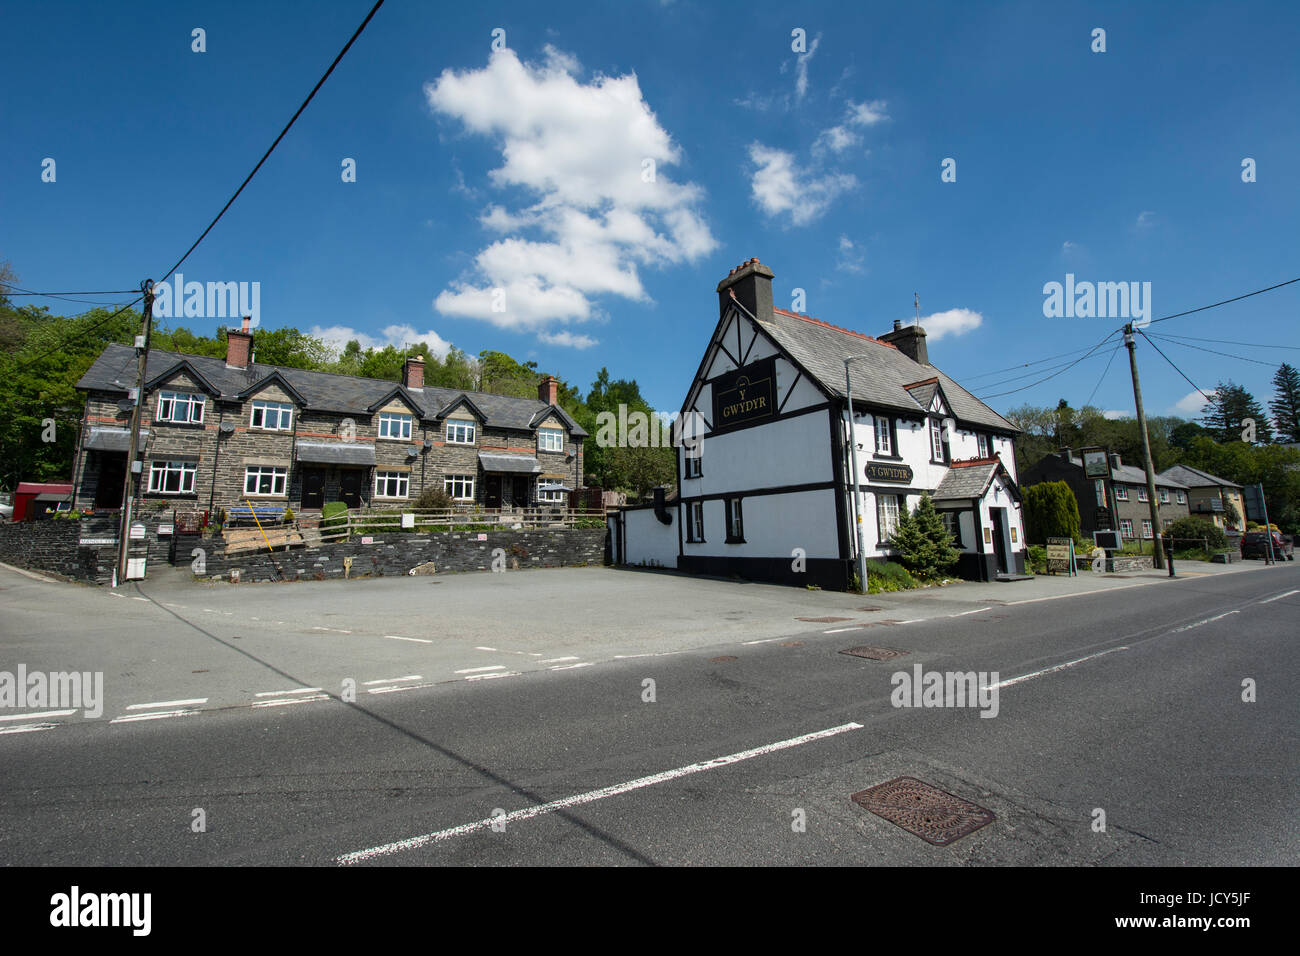 Dolwyddelan village in the Snowdonia National Park (Parc Cenedlaethol Eryri) in North Wales nestling at the foot of Moel Siabod and beside Afon Lledr  Stock Photo